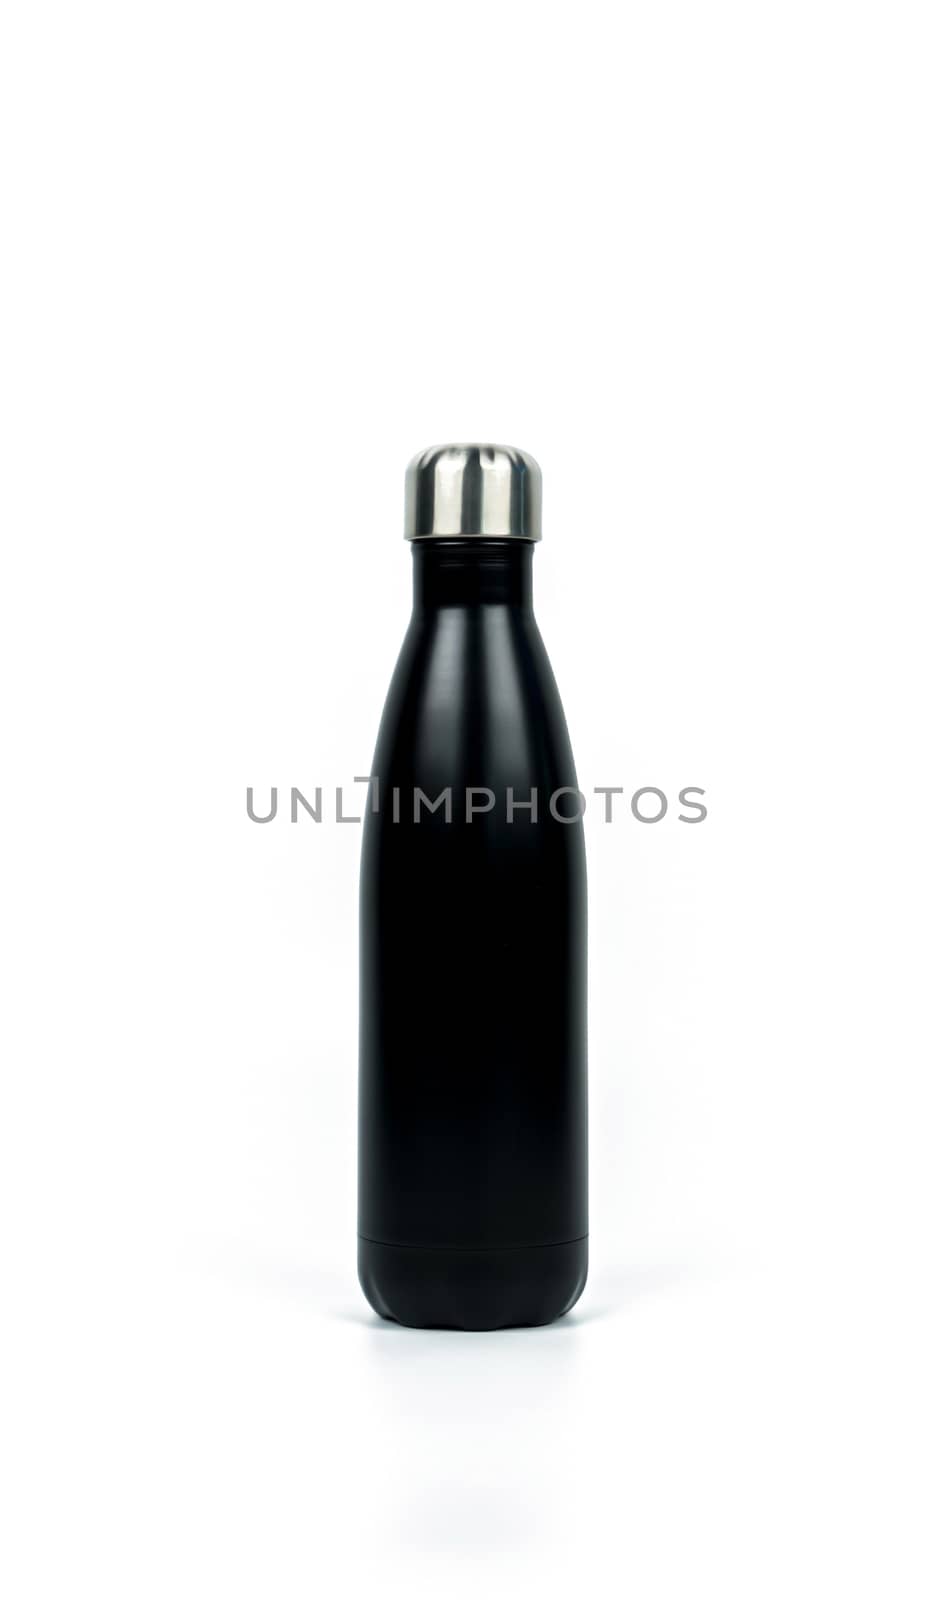 Black thermos bottle with sport design isolated on white background with copy space. Beverage container. Coffee and tea bottle.